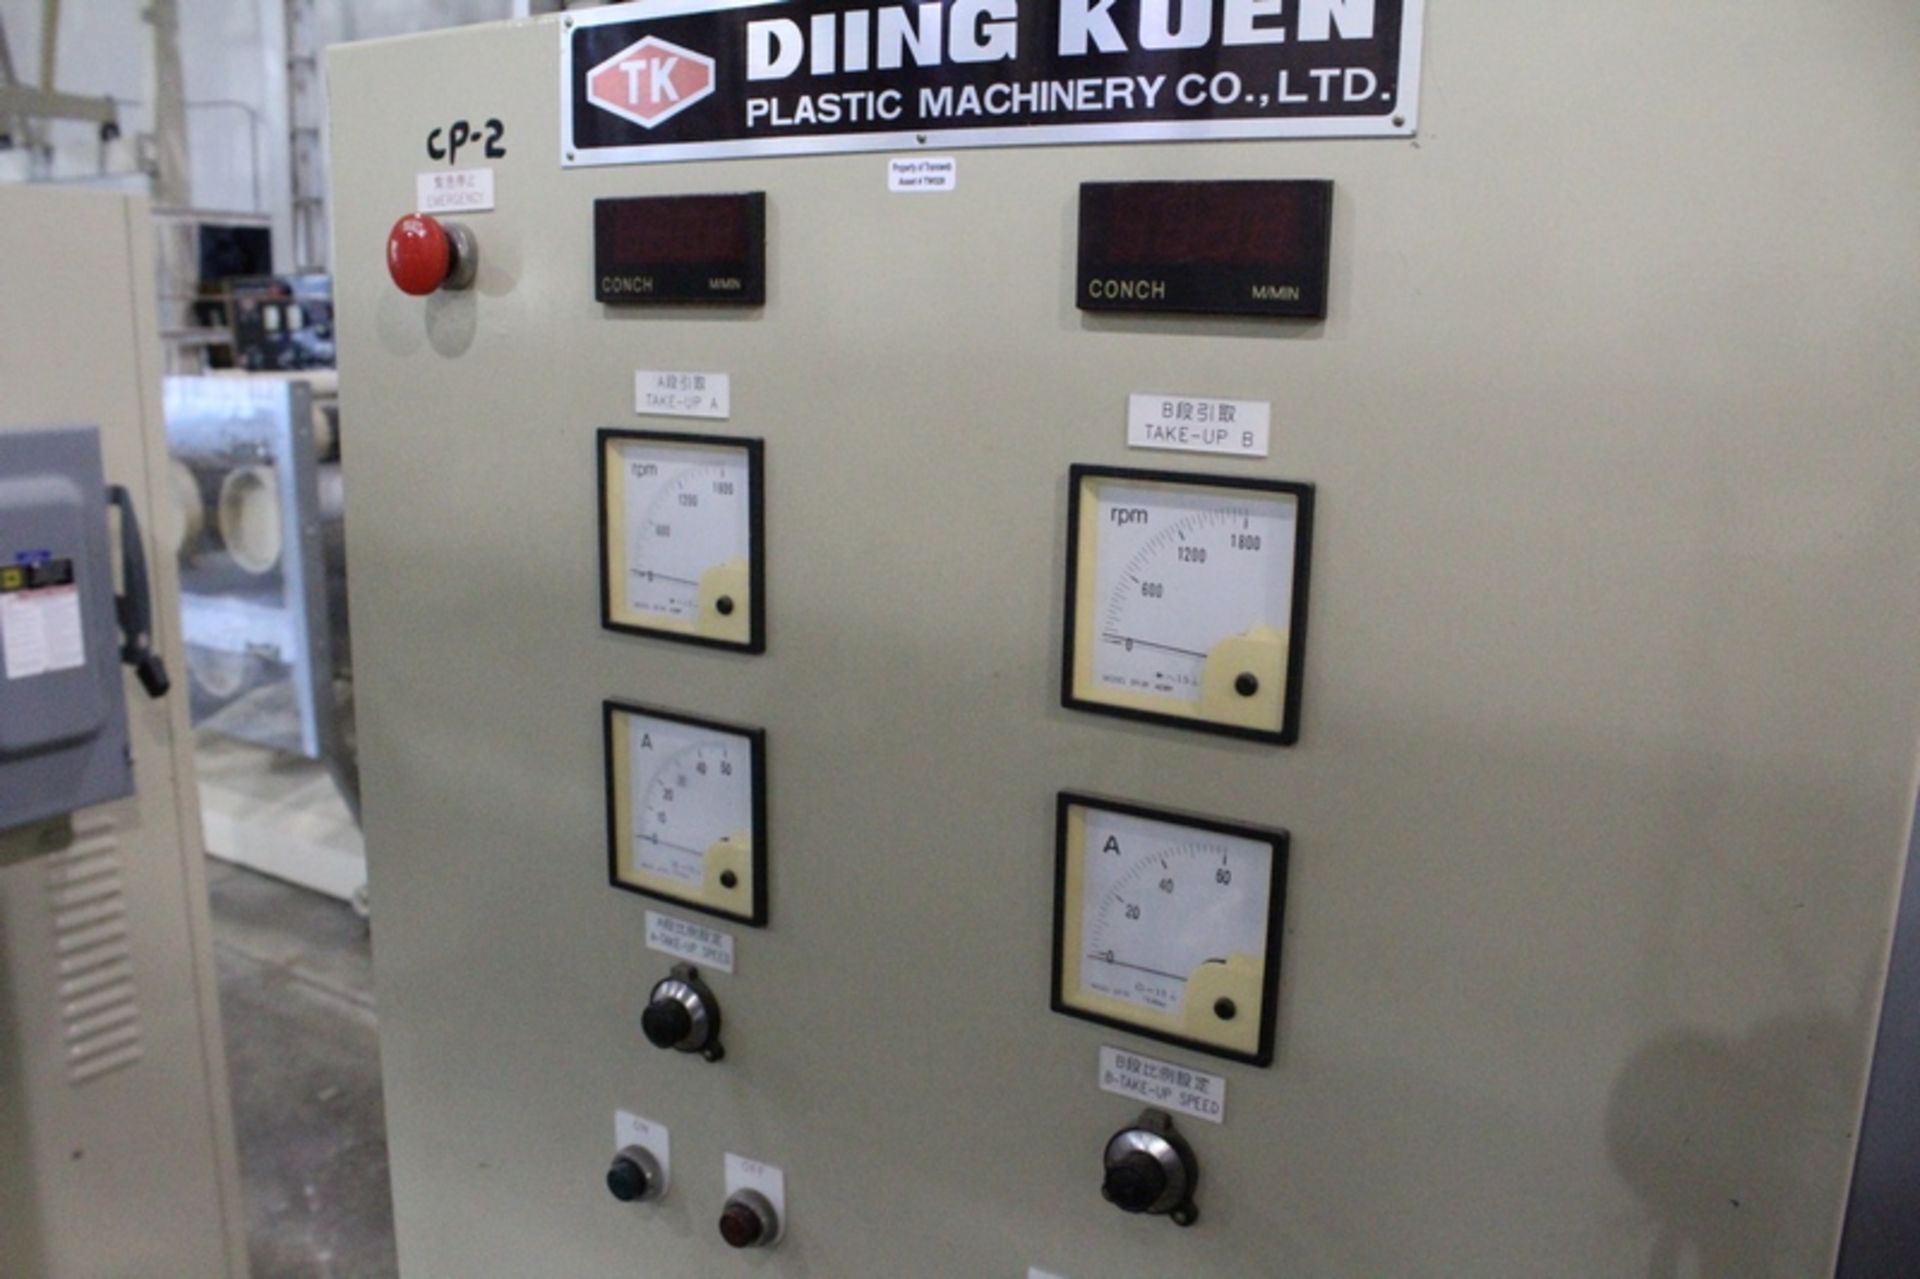 2 - Diing Kuen Model TK-FY30 3 Roll S Roll Stands, s/n 970102 (New 1997), Size 300MML, Digital Conch - Image 7 of 7